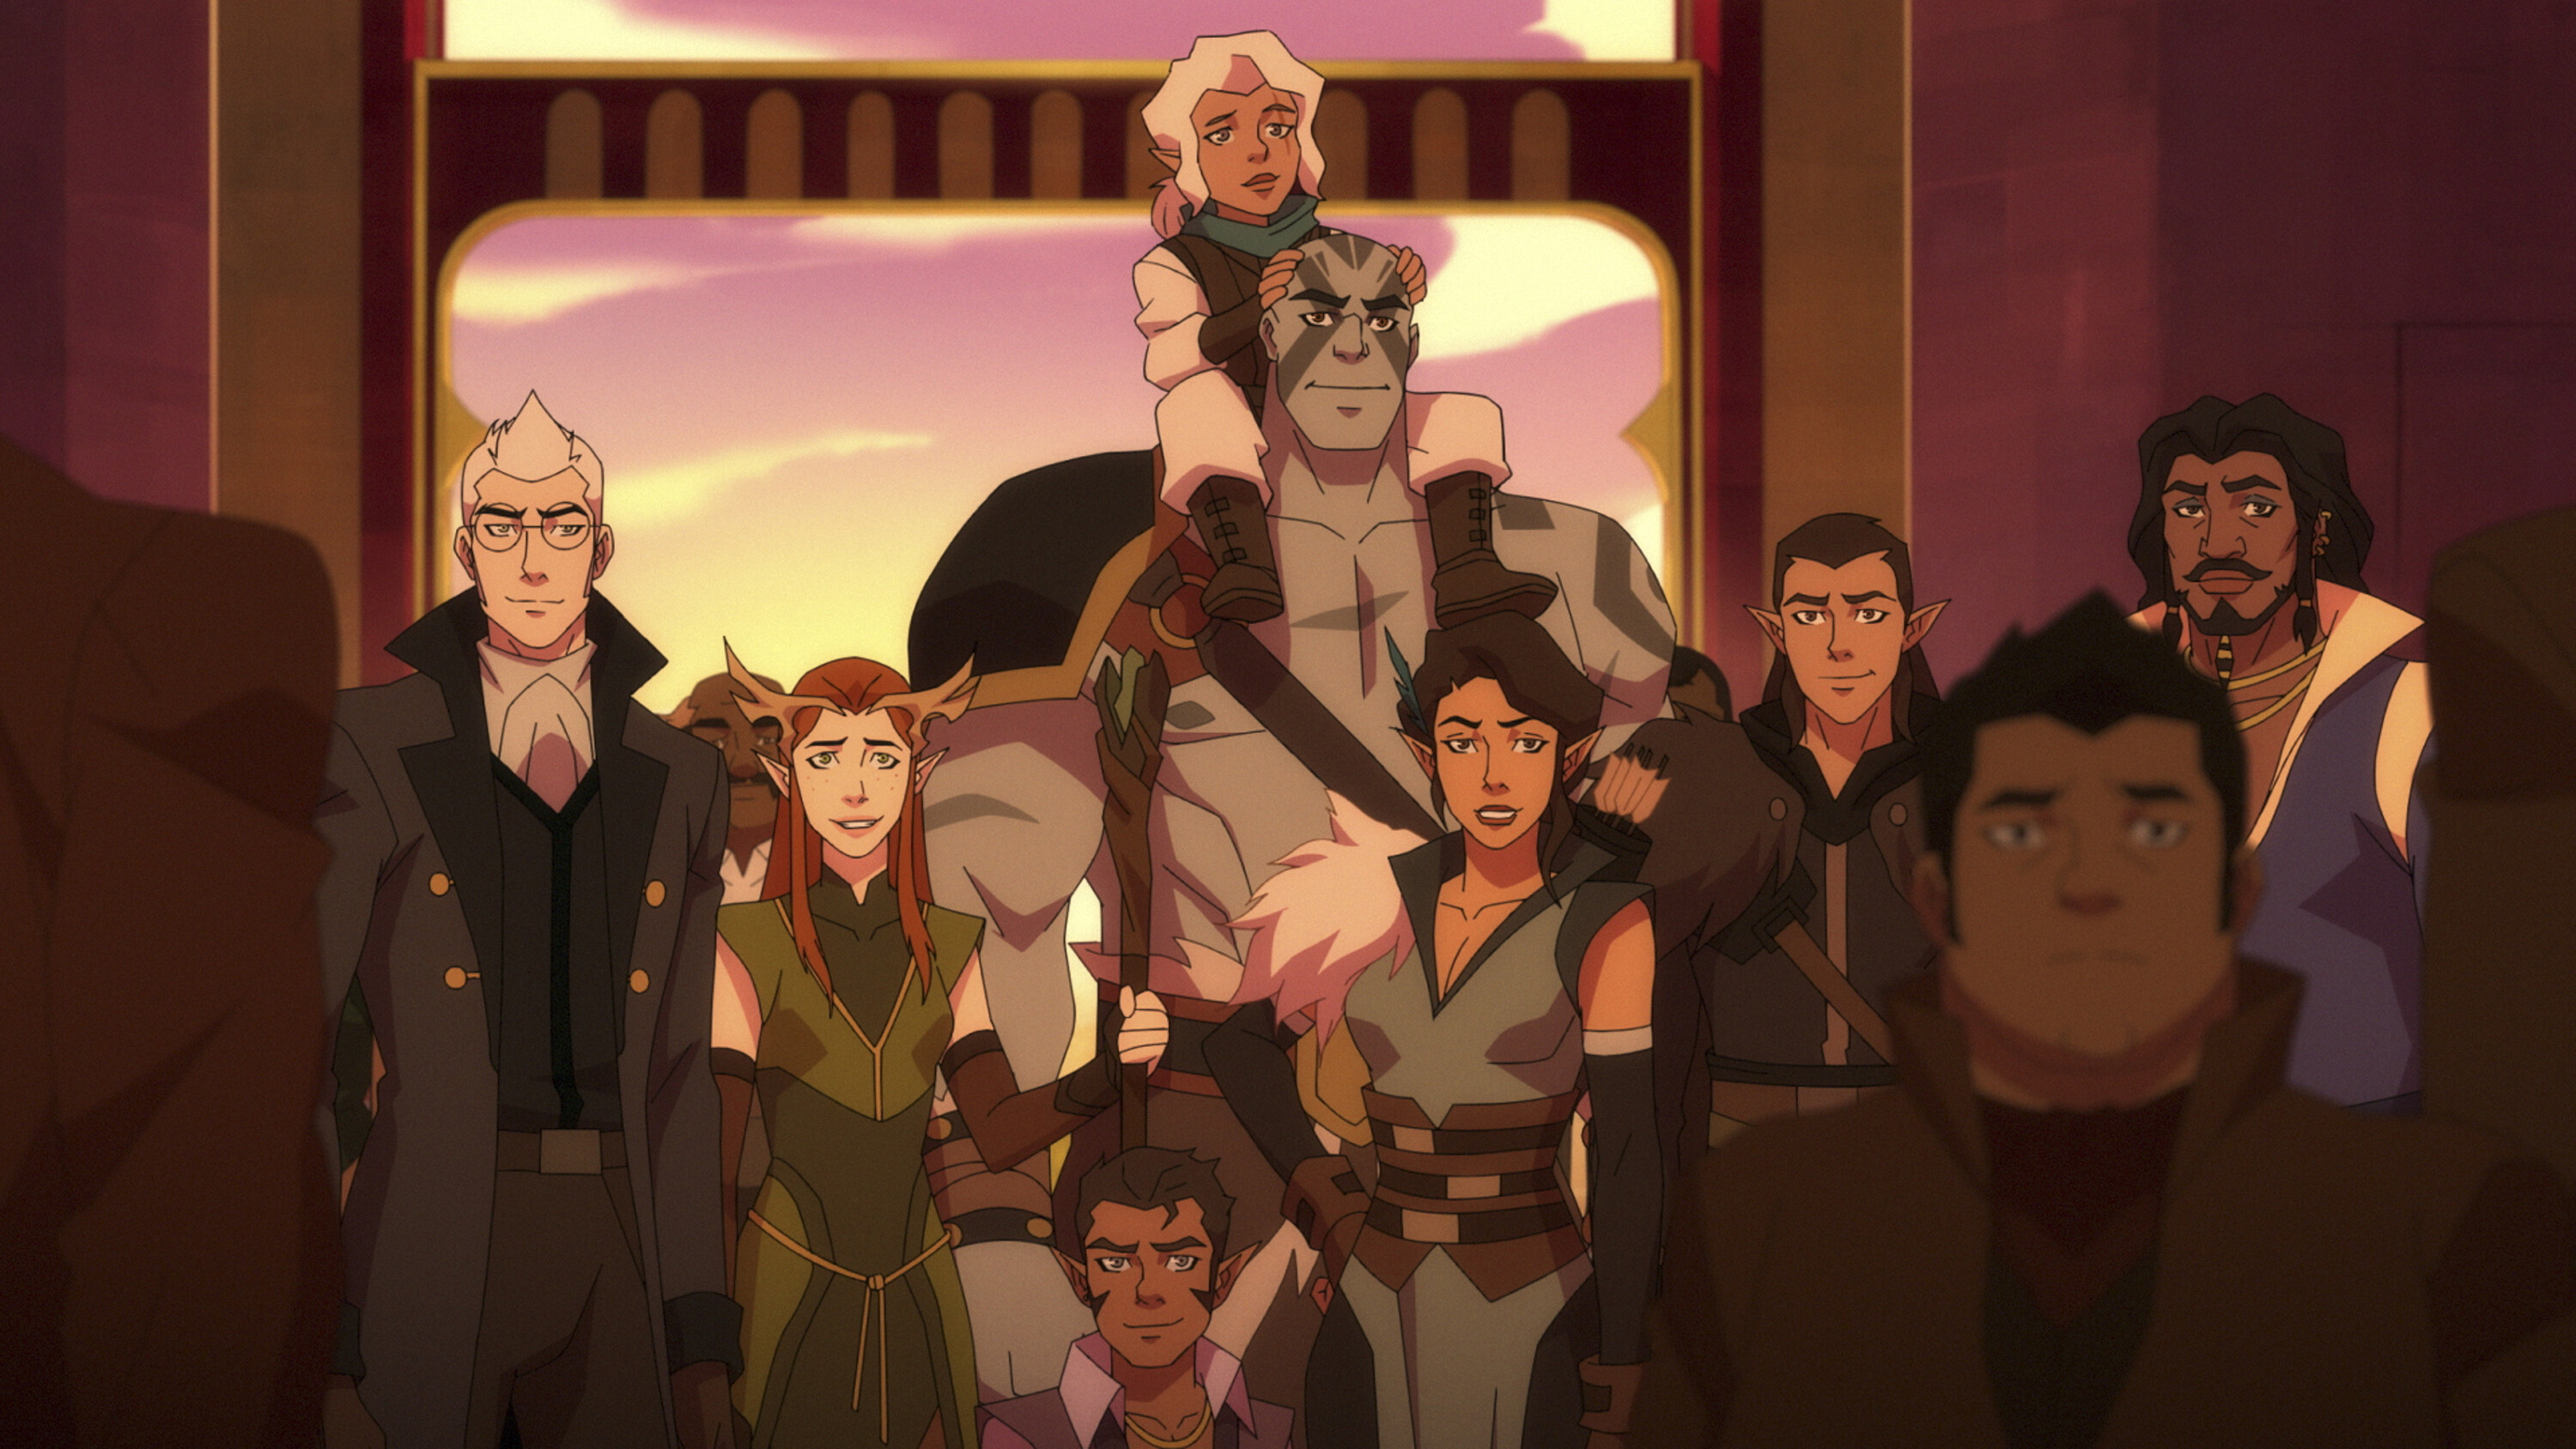 The Legend of Vox Machina 1 season: release dates, ratings